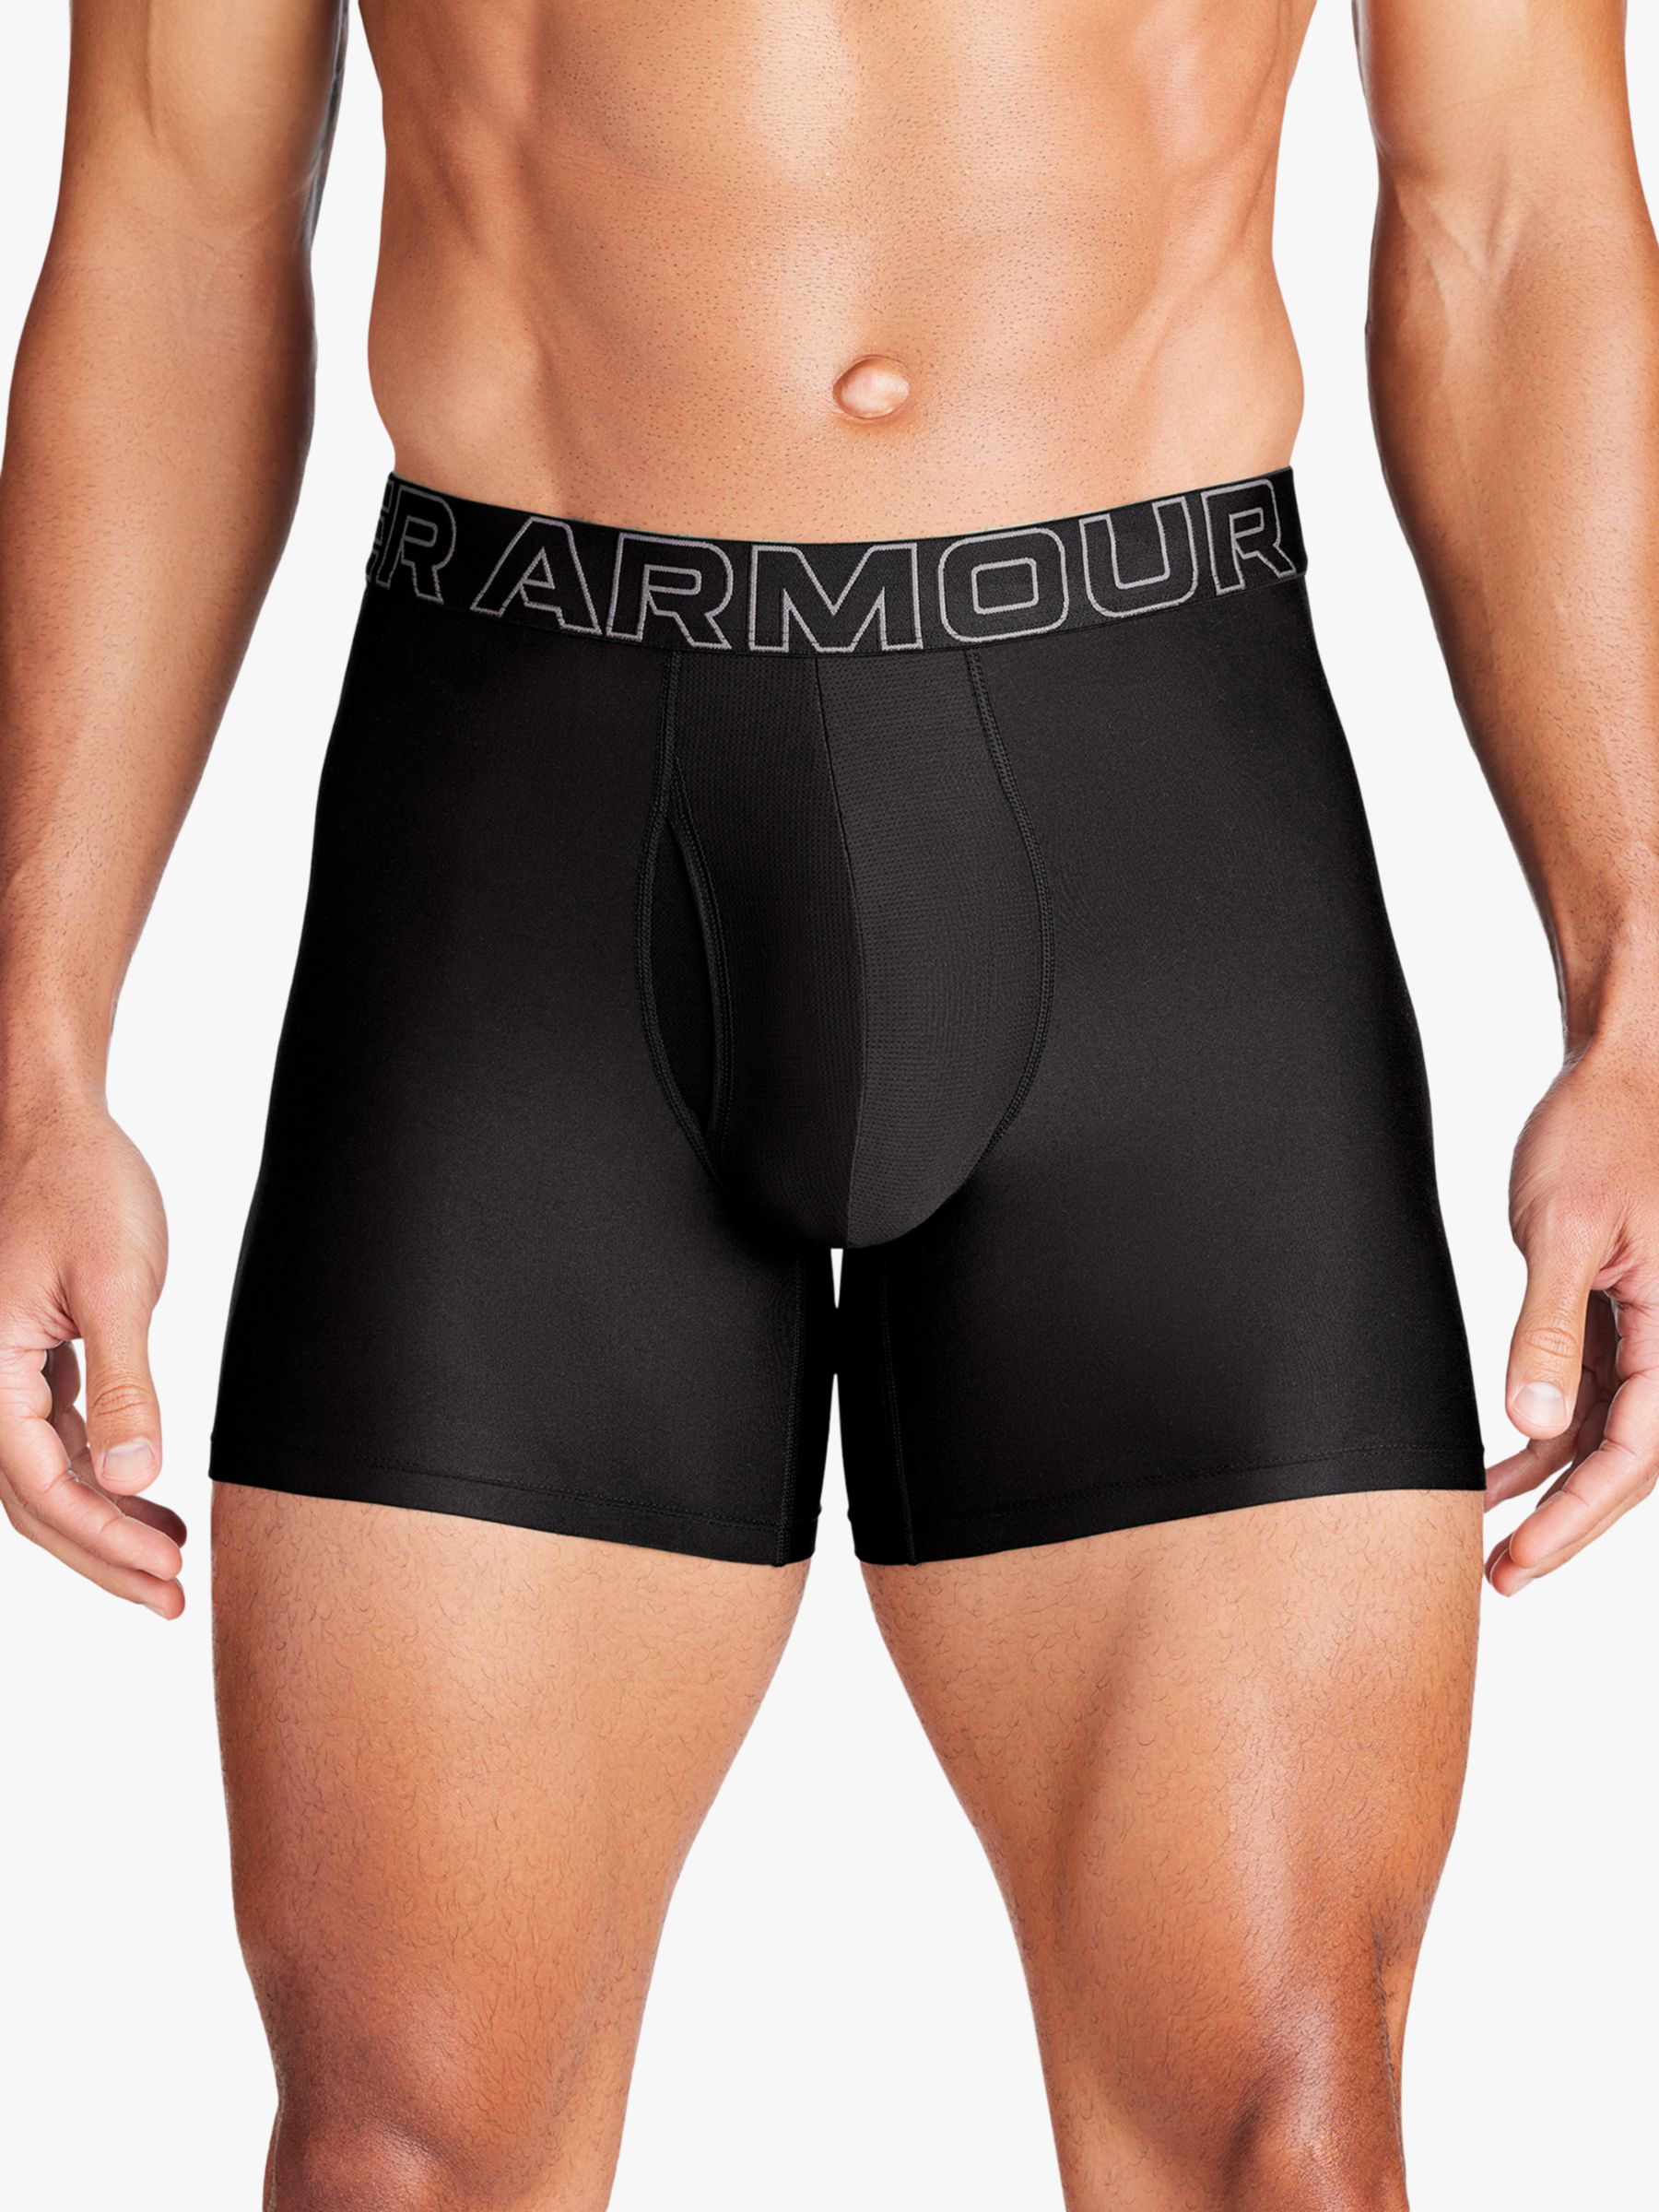 Under Armour Tech 6" Boxers, Pack of 3, Black, XL